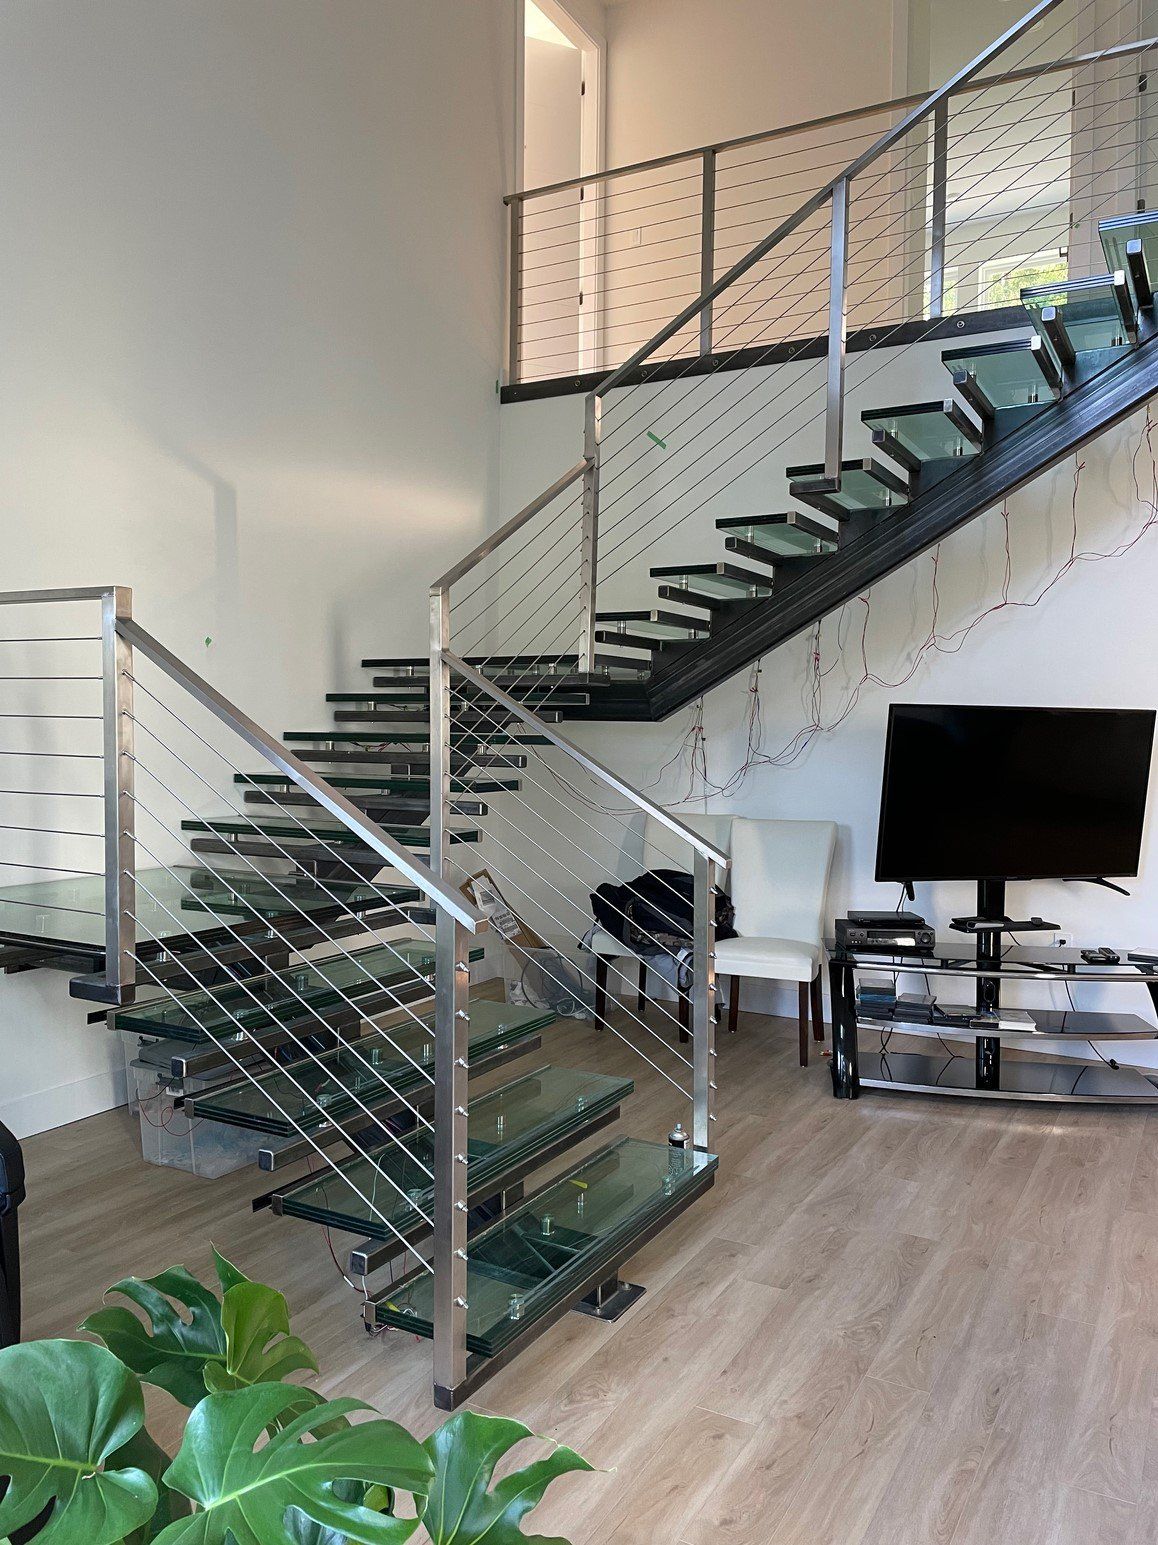 Another mono stringer staircase by Vancouver Fabricators